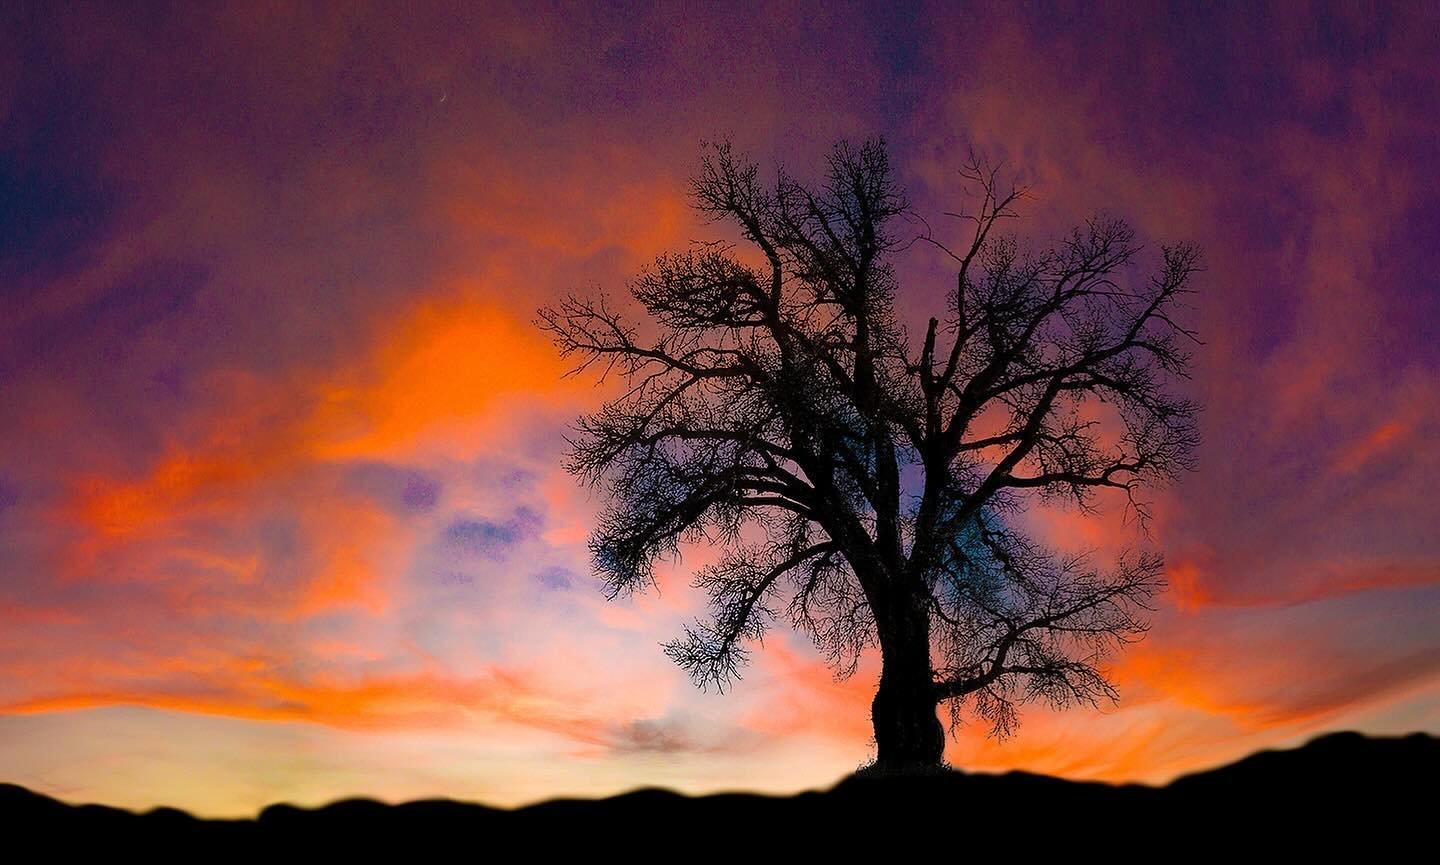 From our &quot;Colorscapes&quot; Exhibit gallery, &quot;Bare Tree at Sunset&quot; by Gordon Middleton. Congratulations to the winners and all the photographers whose work we&rsquo;re honored to include in this show!

#fineartphotography #color #color